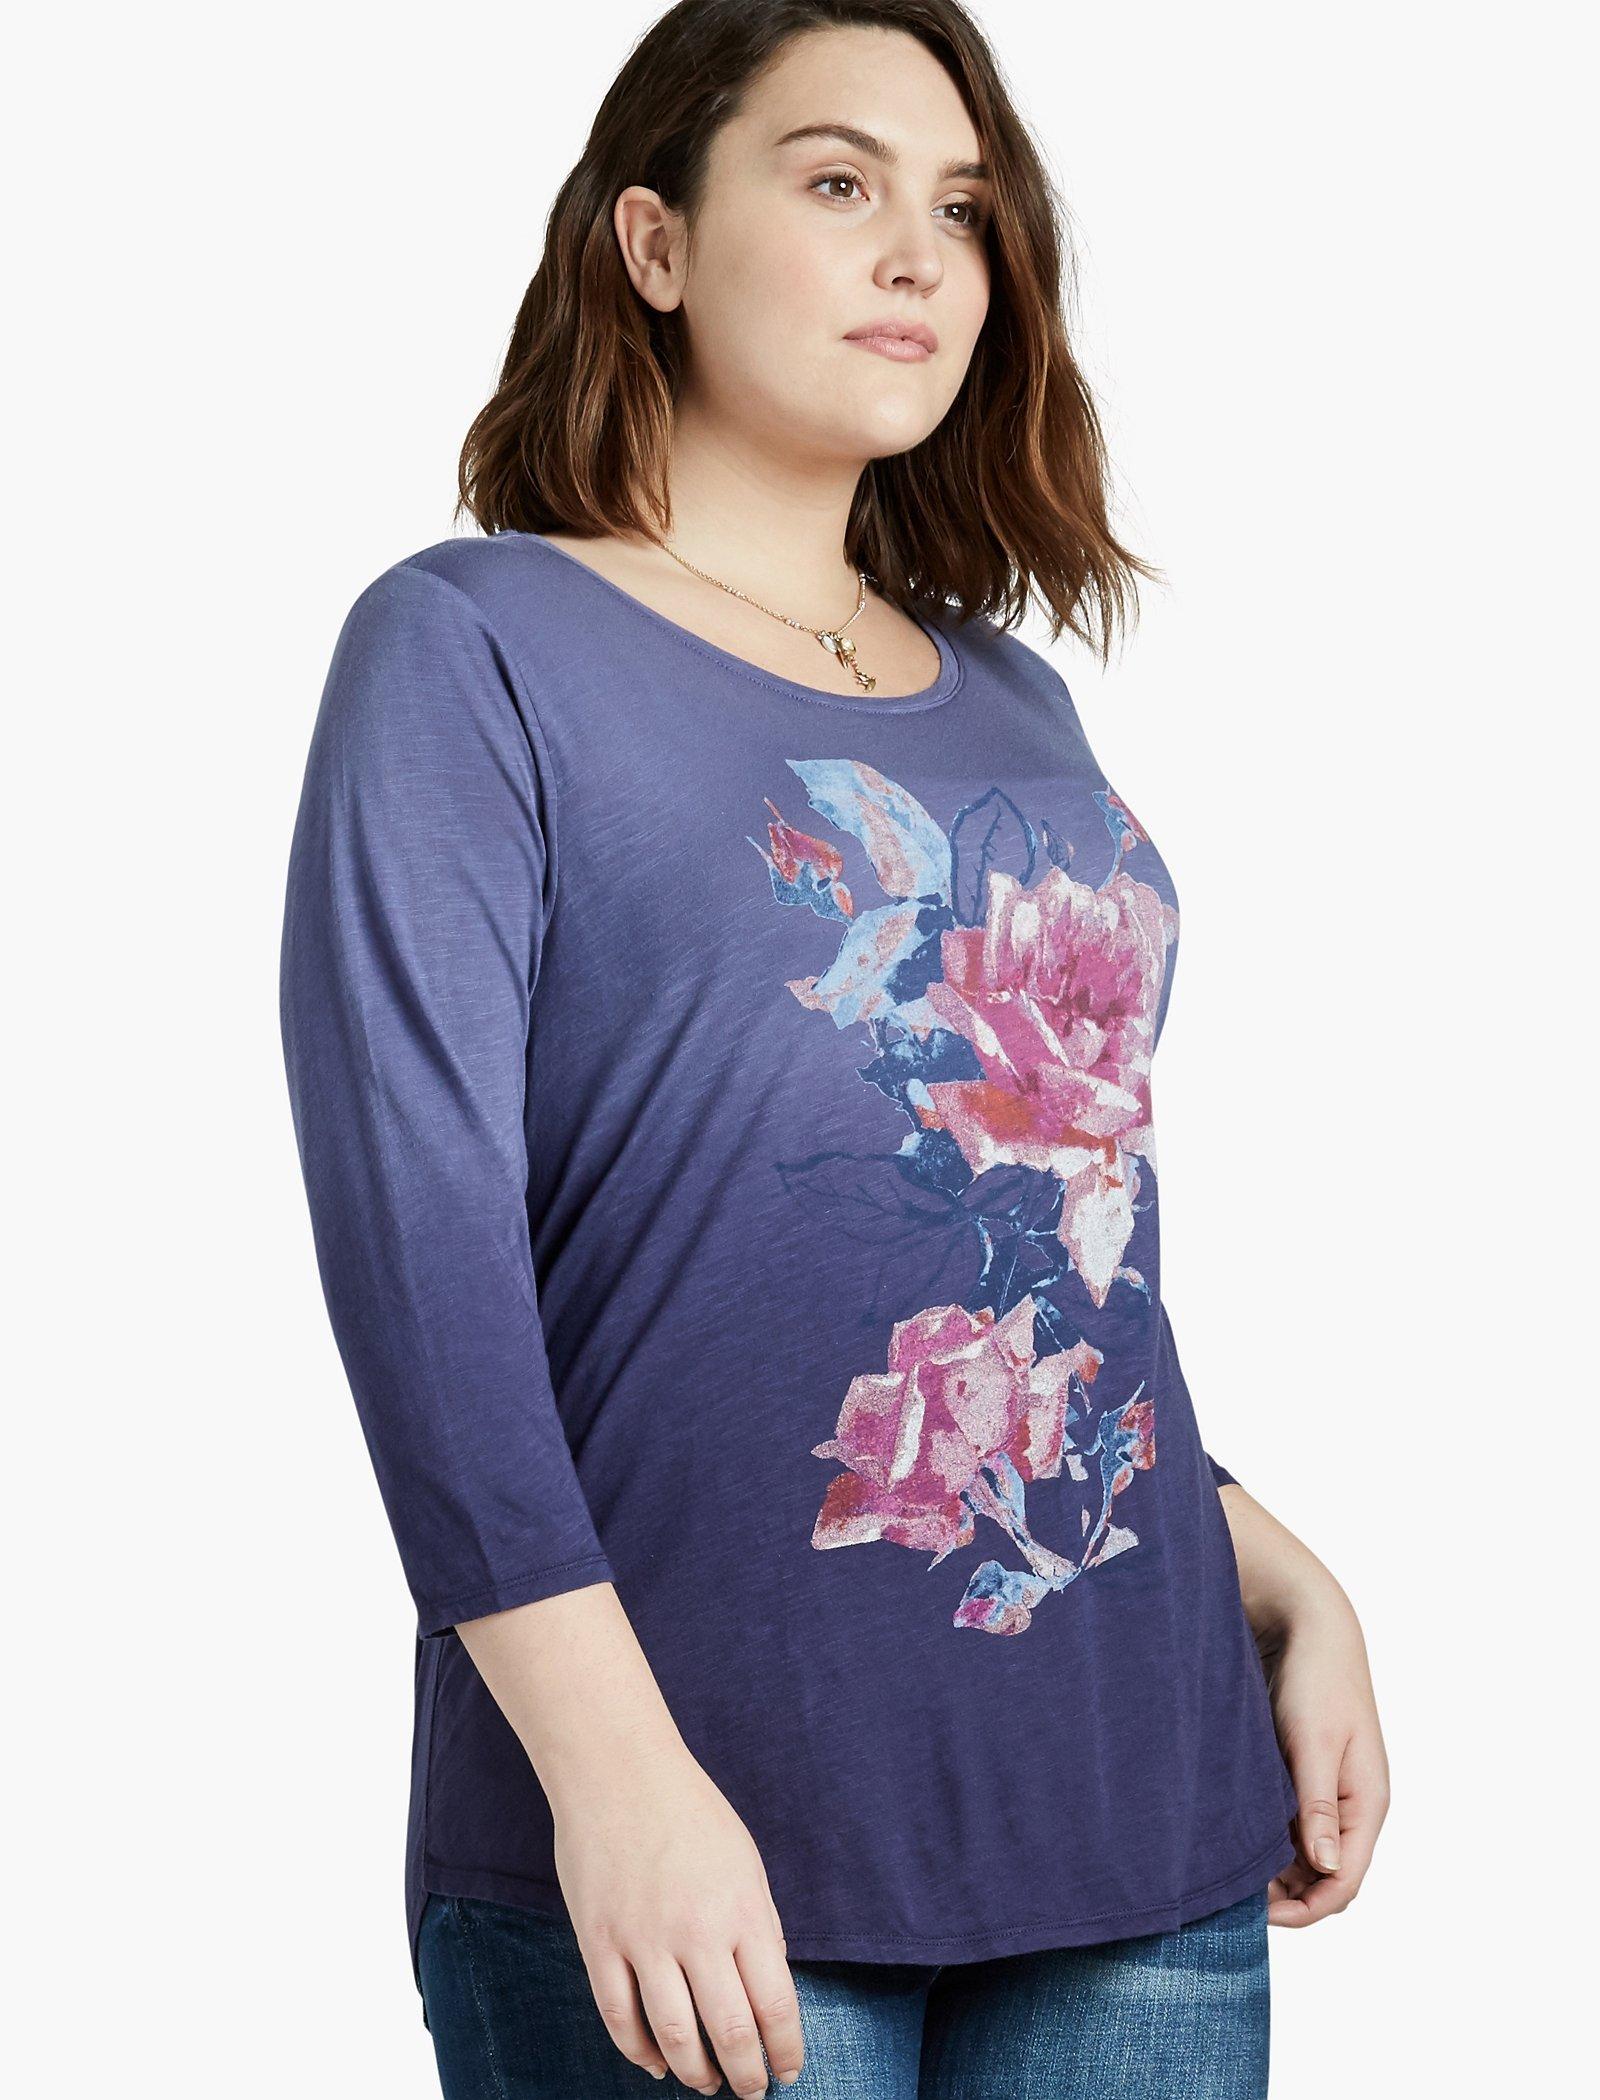 ROSE BOUQUET TEE, image 1